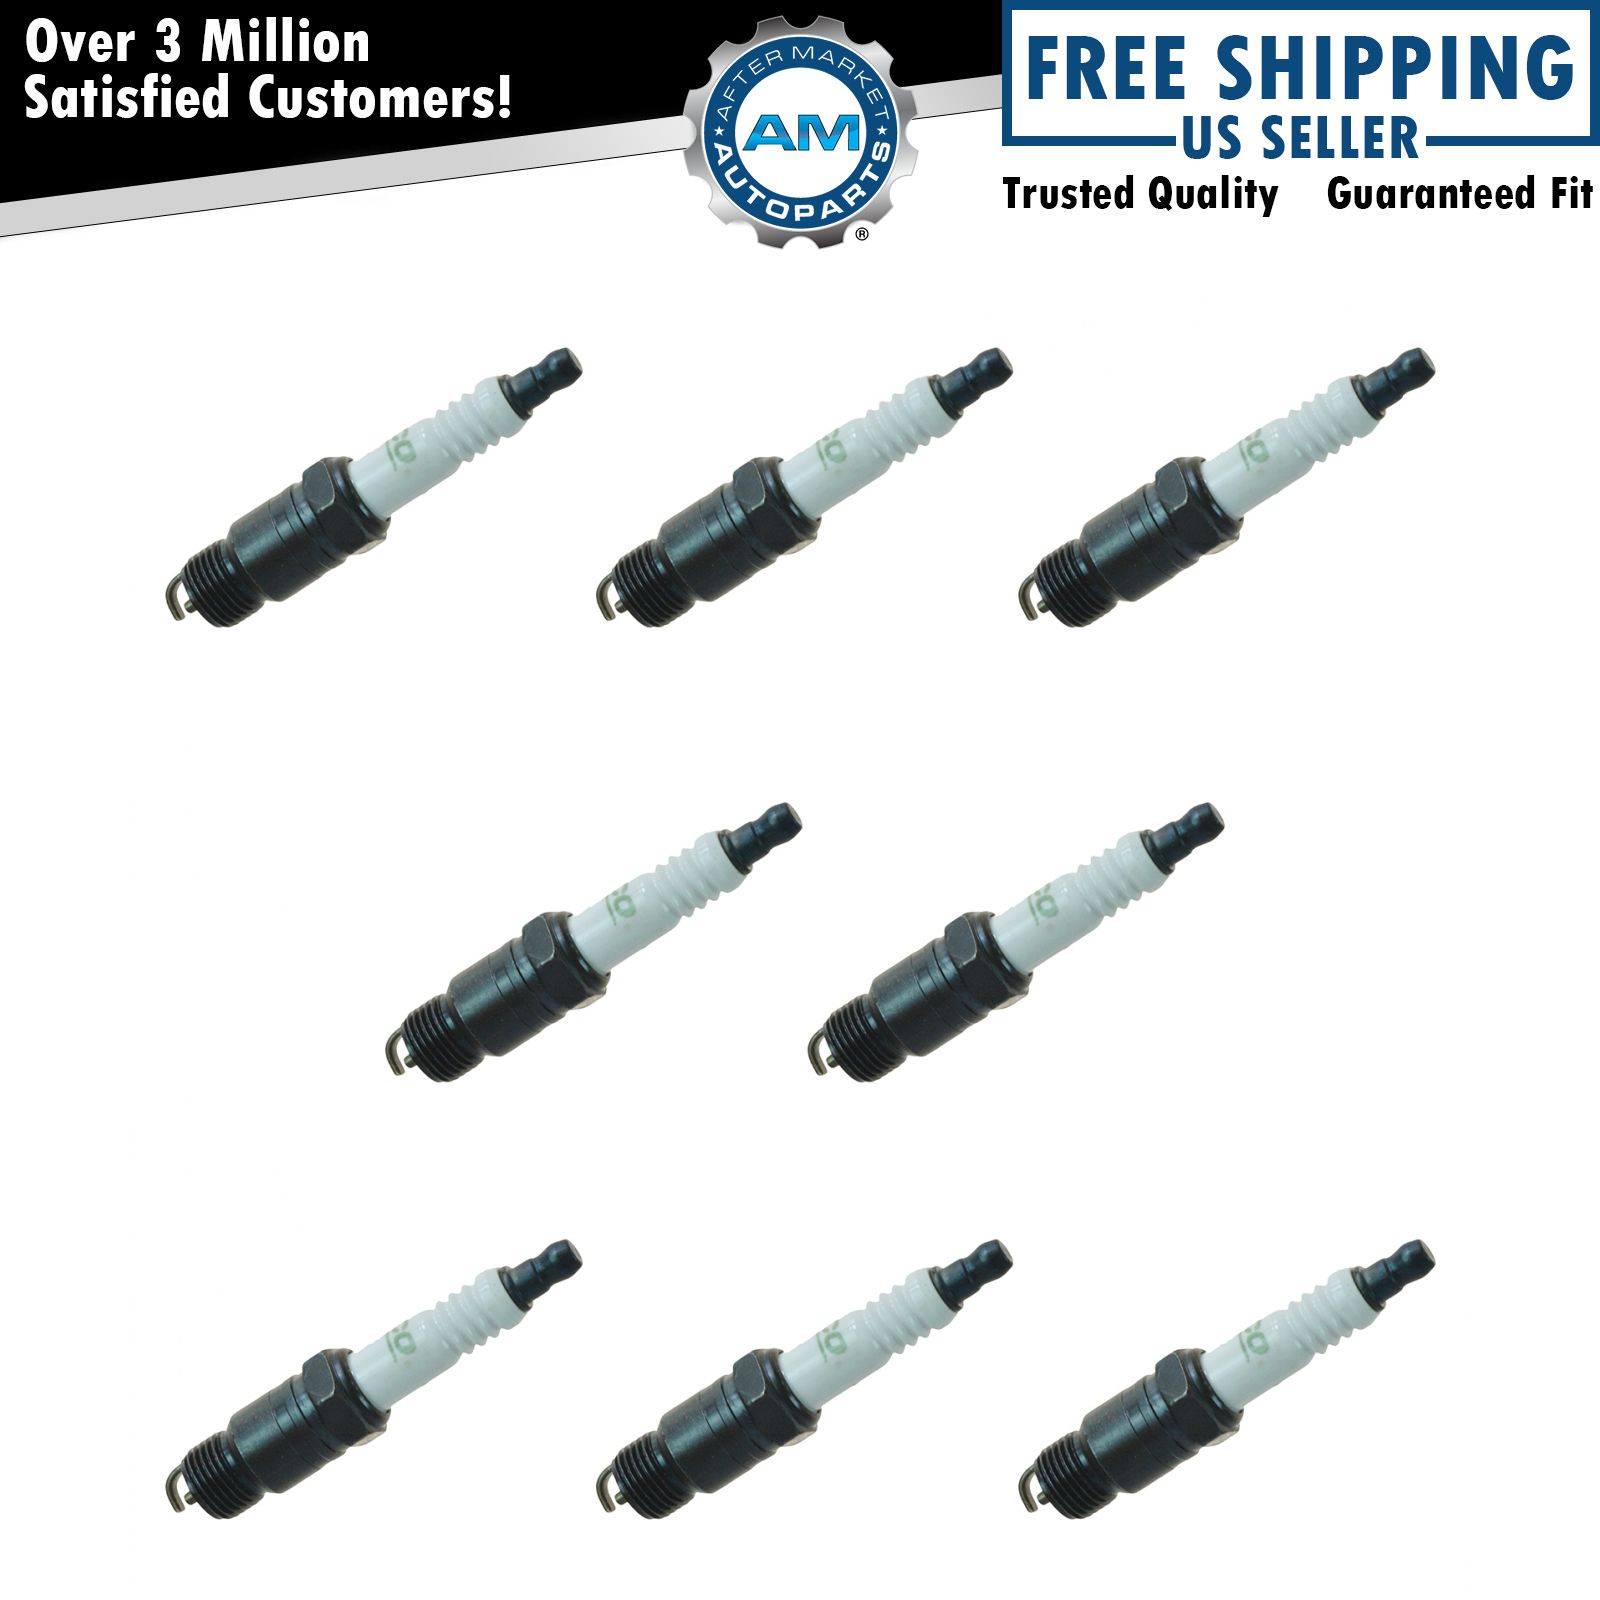 AC Delco R45TS Spark Plug Set of 8 for Chevy GMC Buick Cadillac Pontiac Olds New